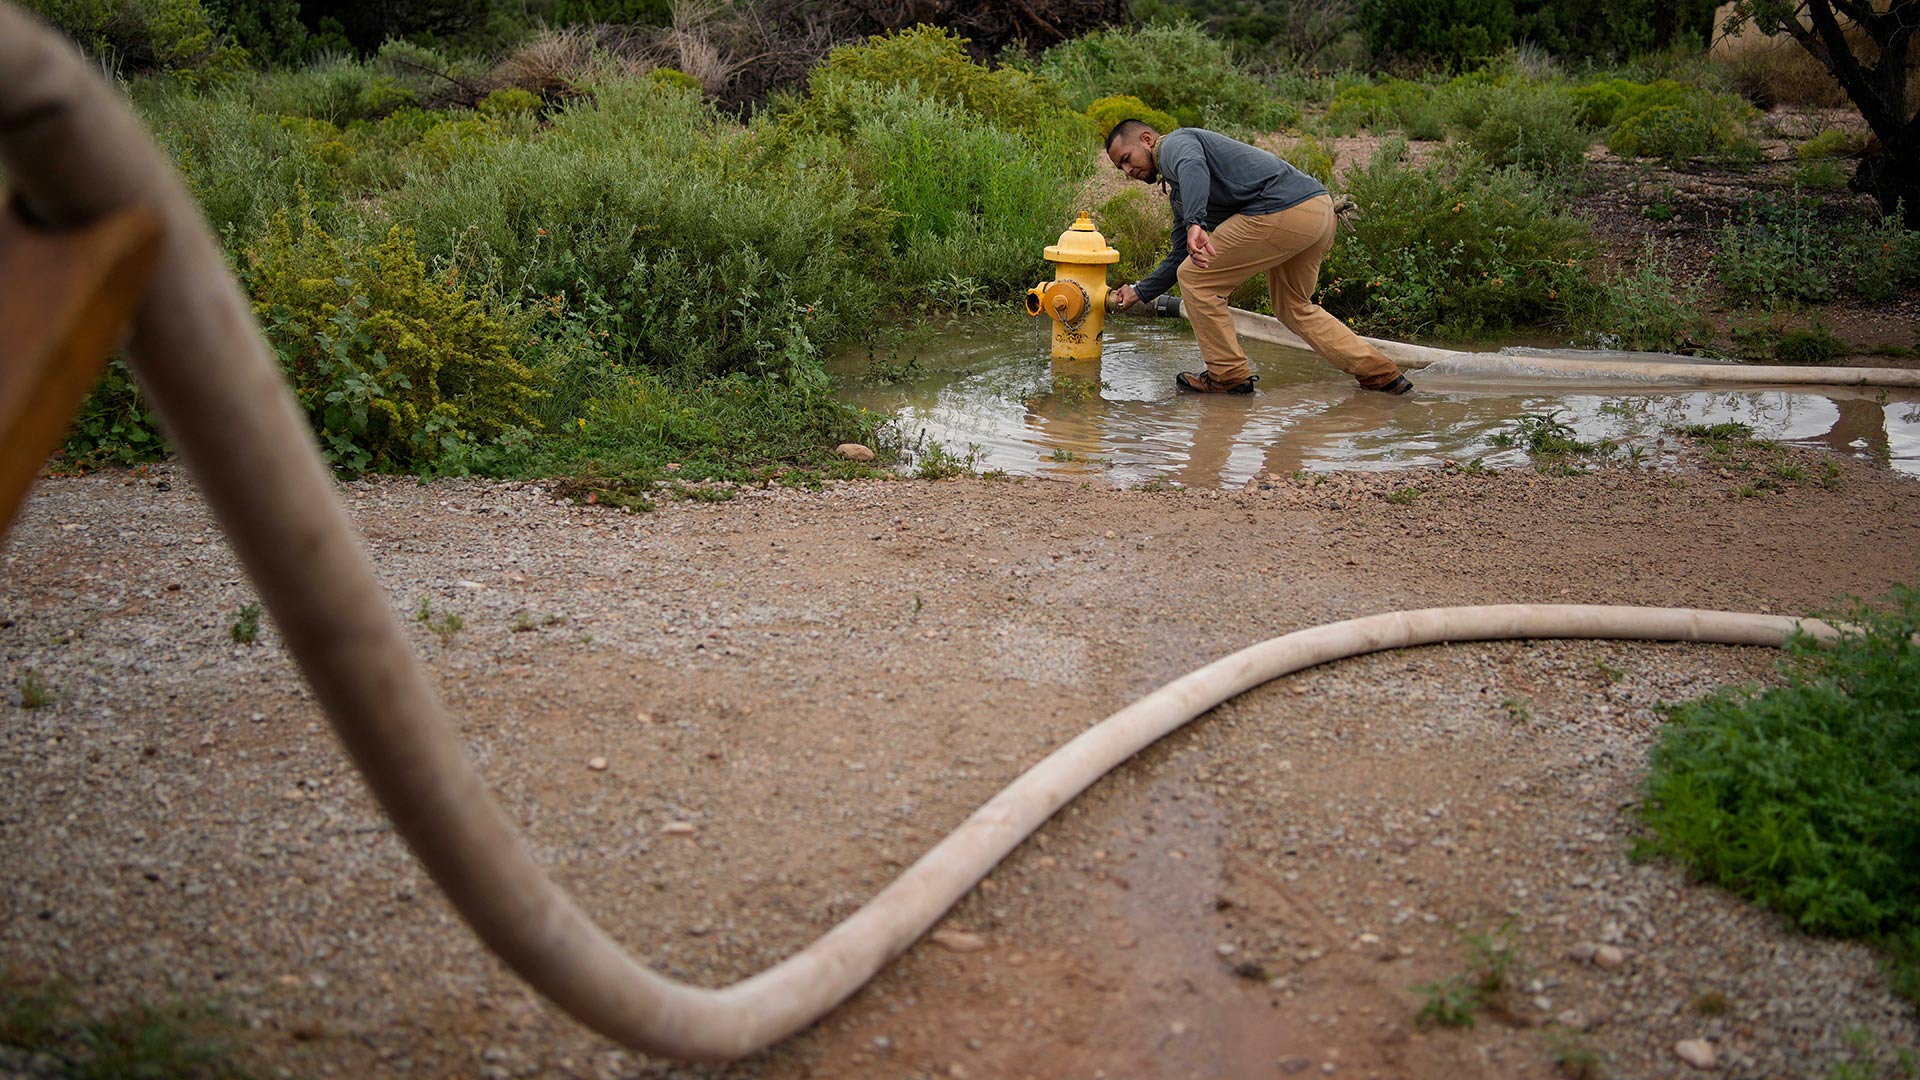 Garnett Querta fills his water truck from a fire hydrant on the Hualapai reservation Monday, Aug. 15, 2022, in Peach Springs, Ariz. The water pulled from the ground here will be piped dozens of miles across the rugged landscape to serve the roughly 600,000 tourists a year who visit the Grand Canyon on the Hualapai reservation in northwestern Arizona — an operation that's the tribe's main source of revenue.